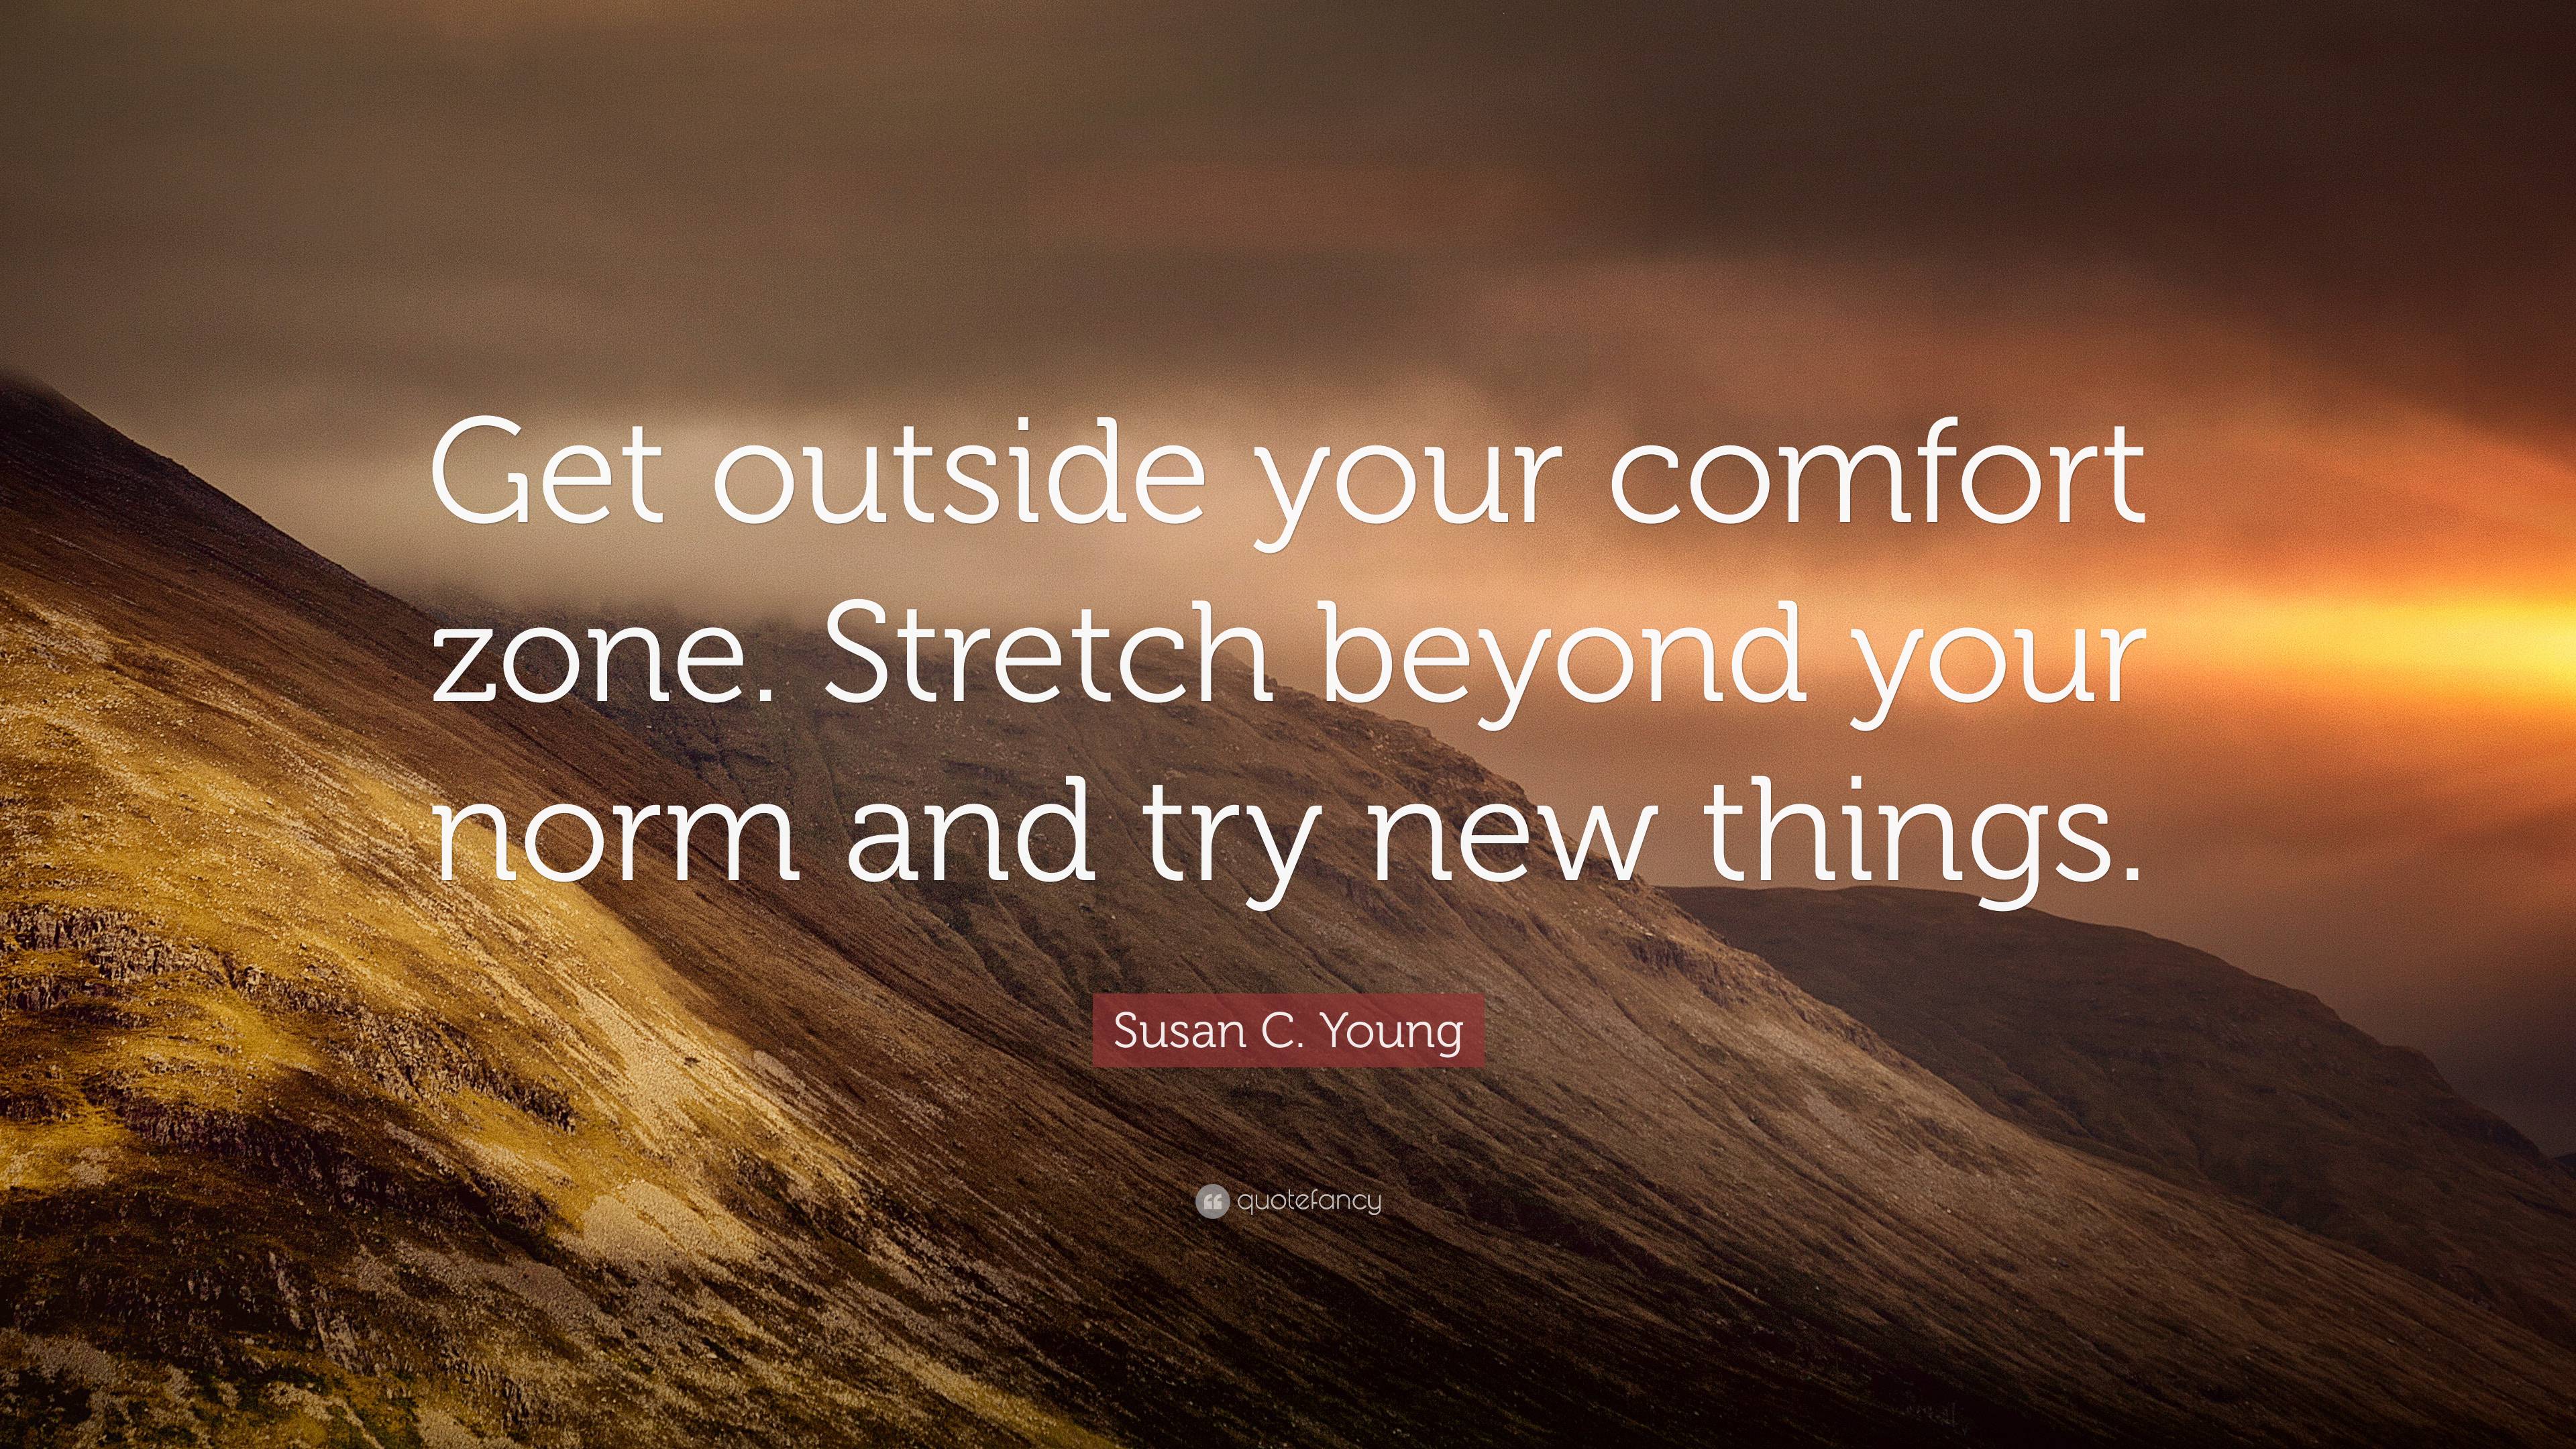 https://quotefancy.com/media/wallpaper/3840x2160/7663293-Susan-C-Young-Quote-Get-outside-your-comfort-zone-Stretch-beyond.jpg